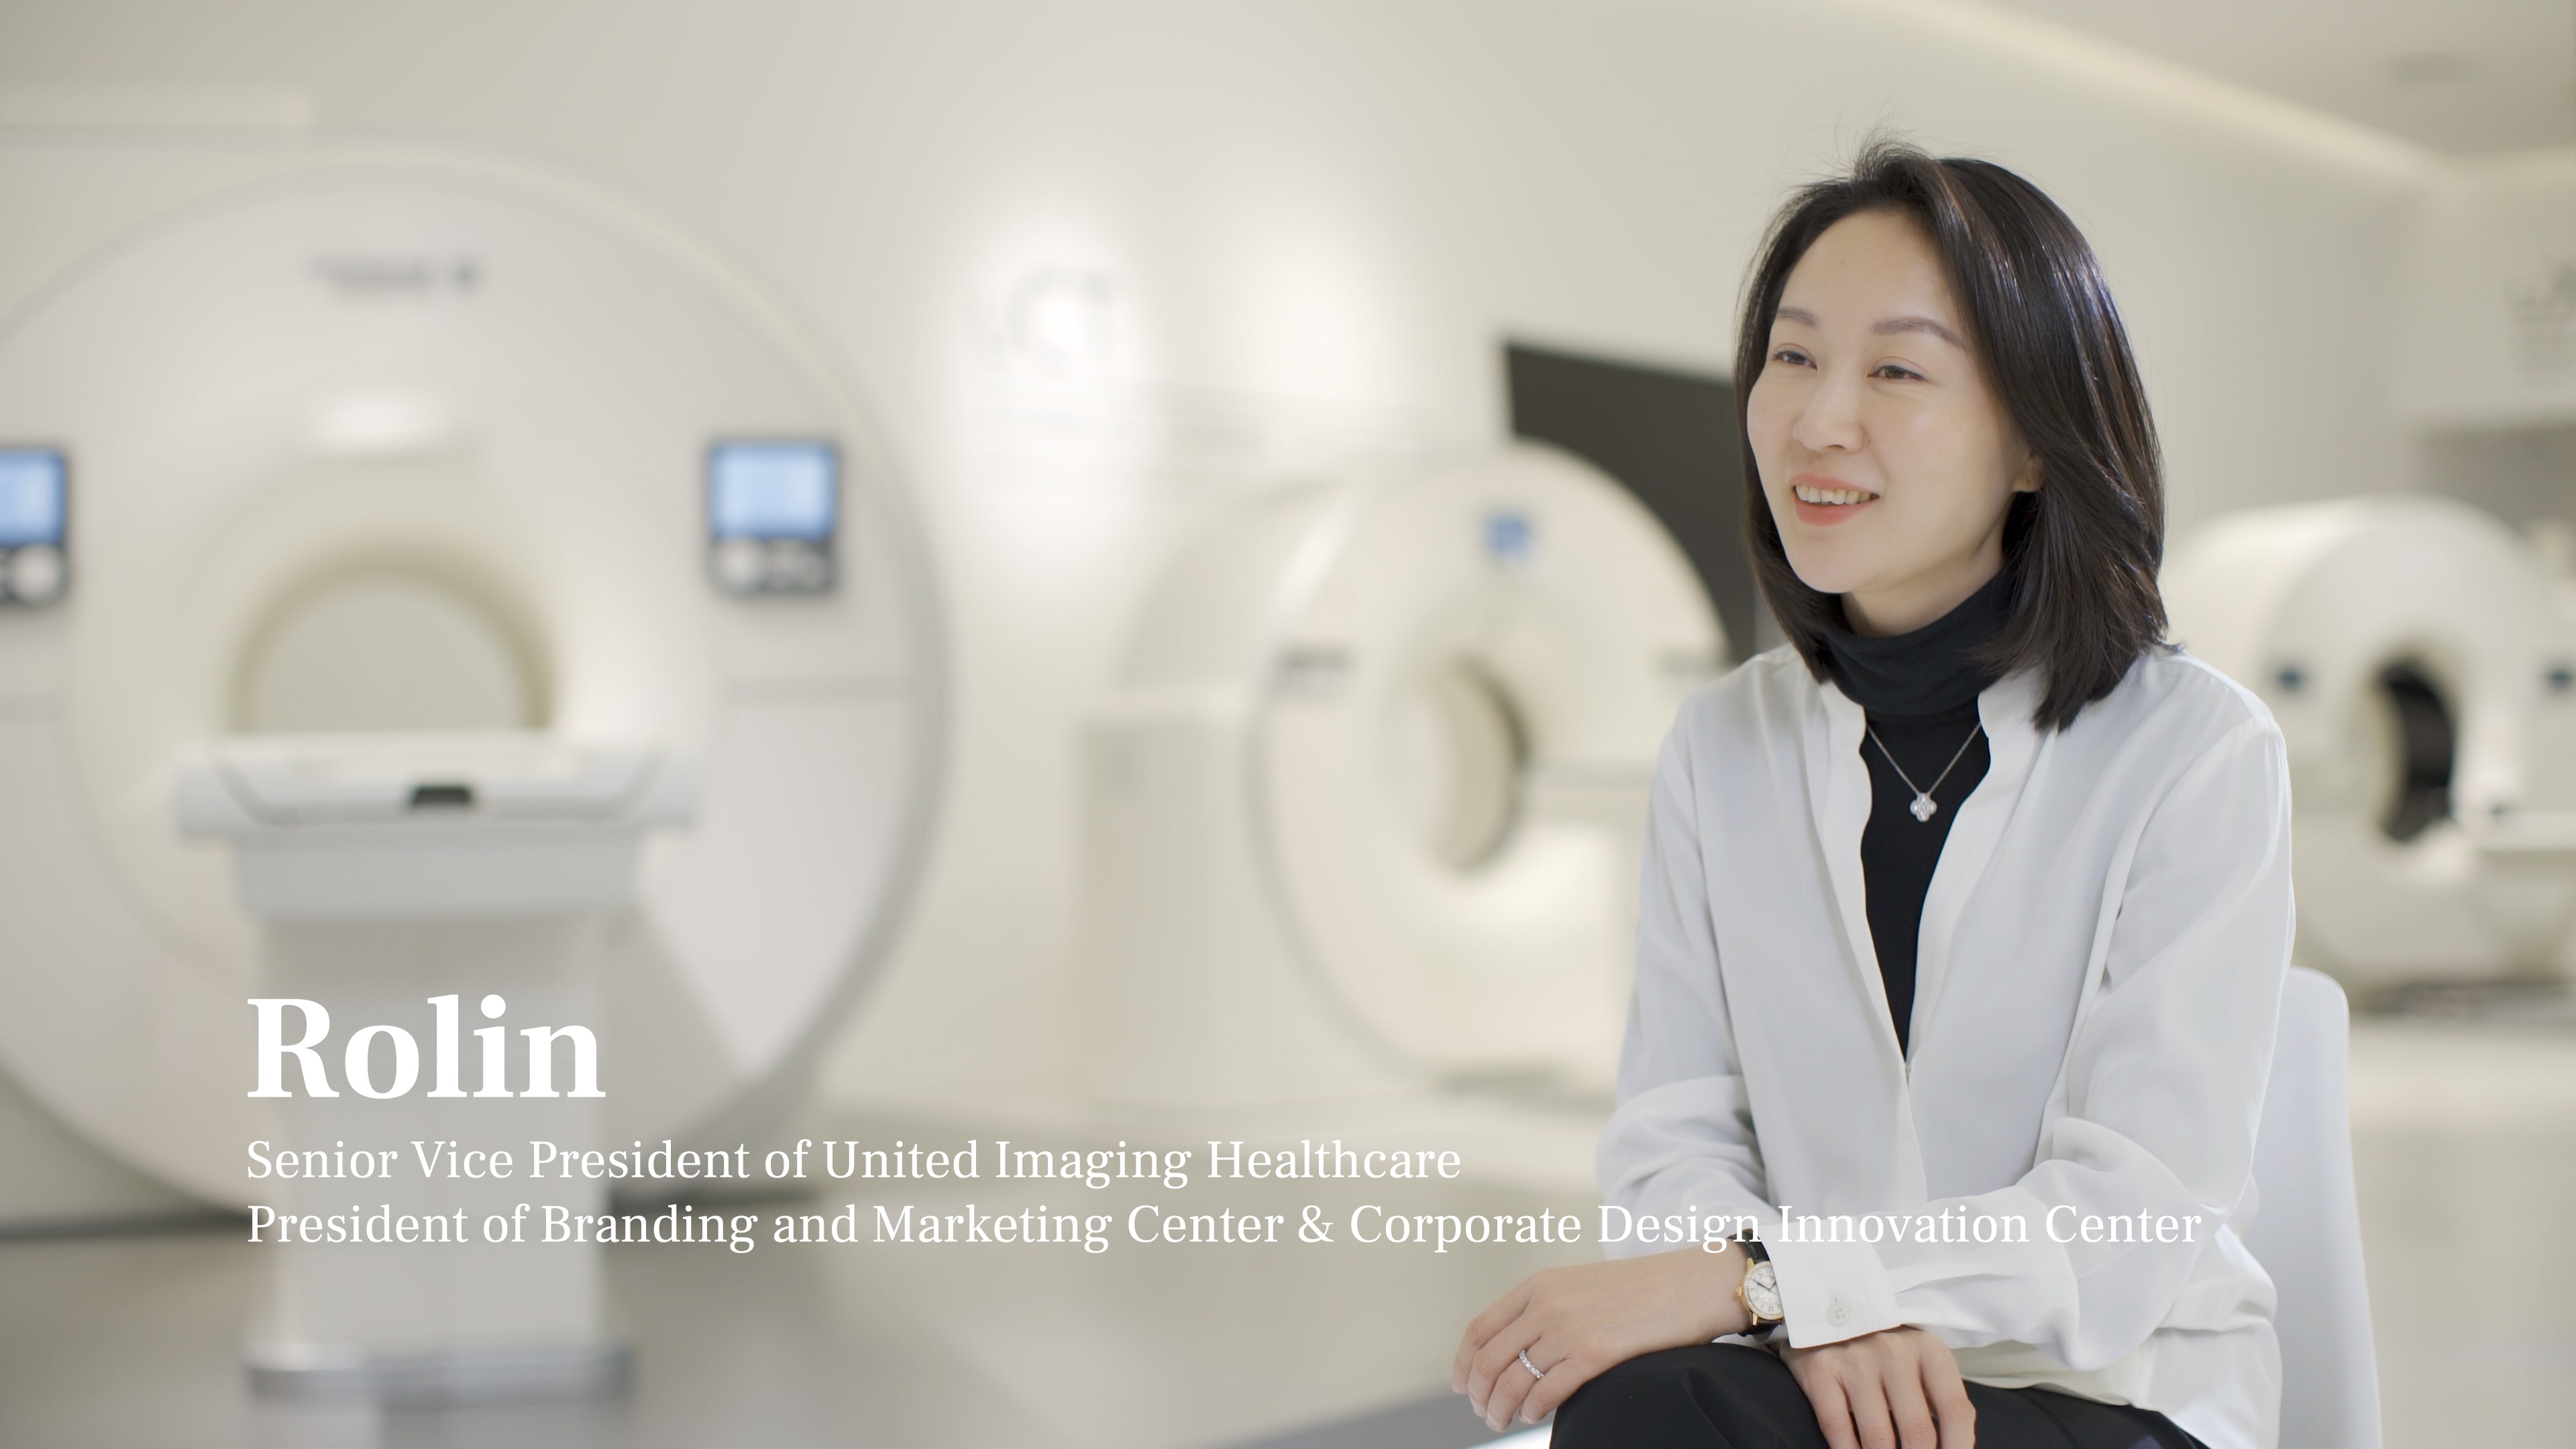 Rolin, Senior Vice President of United Imaging Healthcare, in an interview